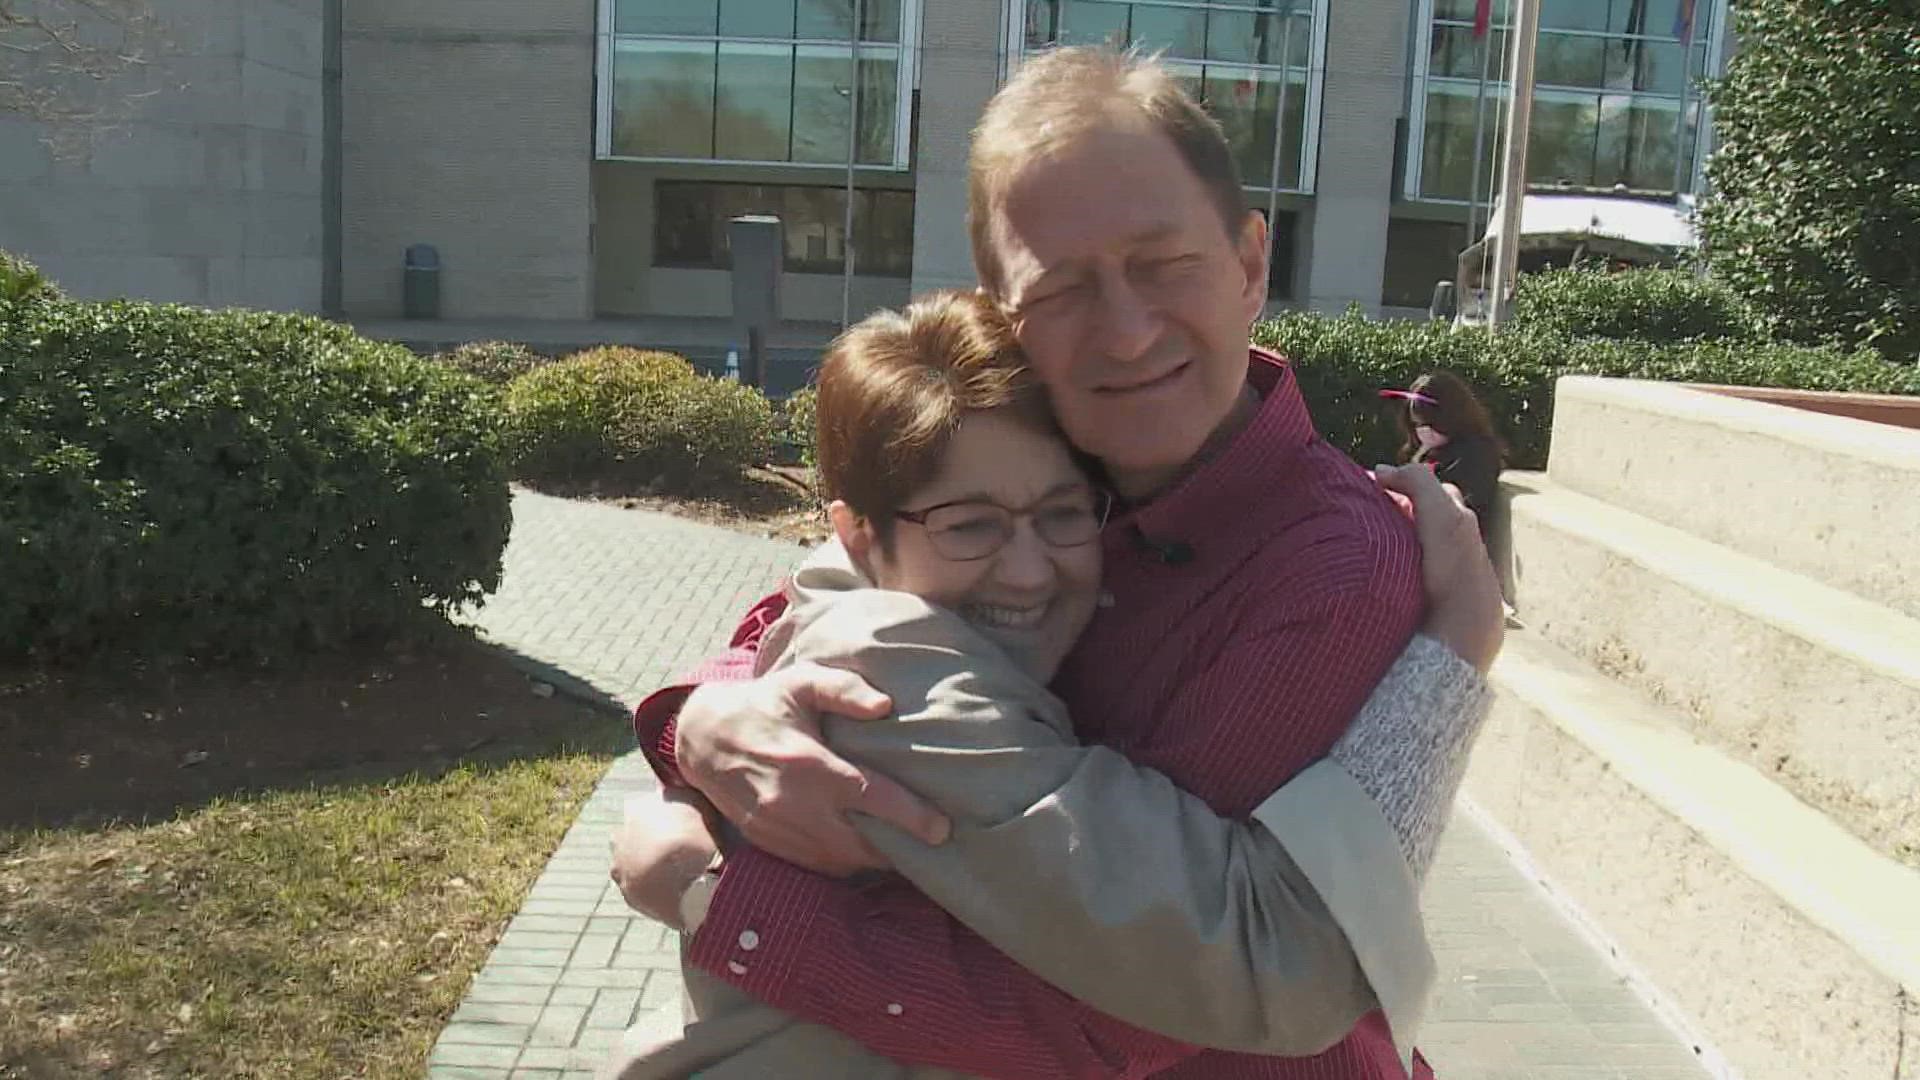 He needed a transplant, but when his heart got worse, he was set for a different operation that would have prevented the transplant from happening.